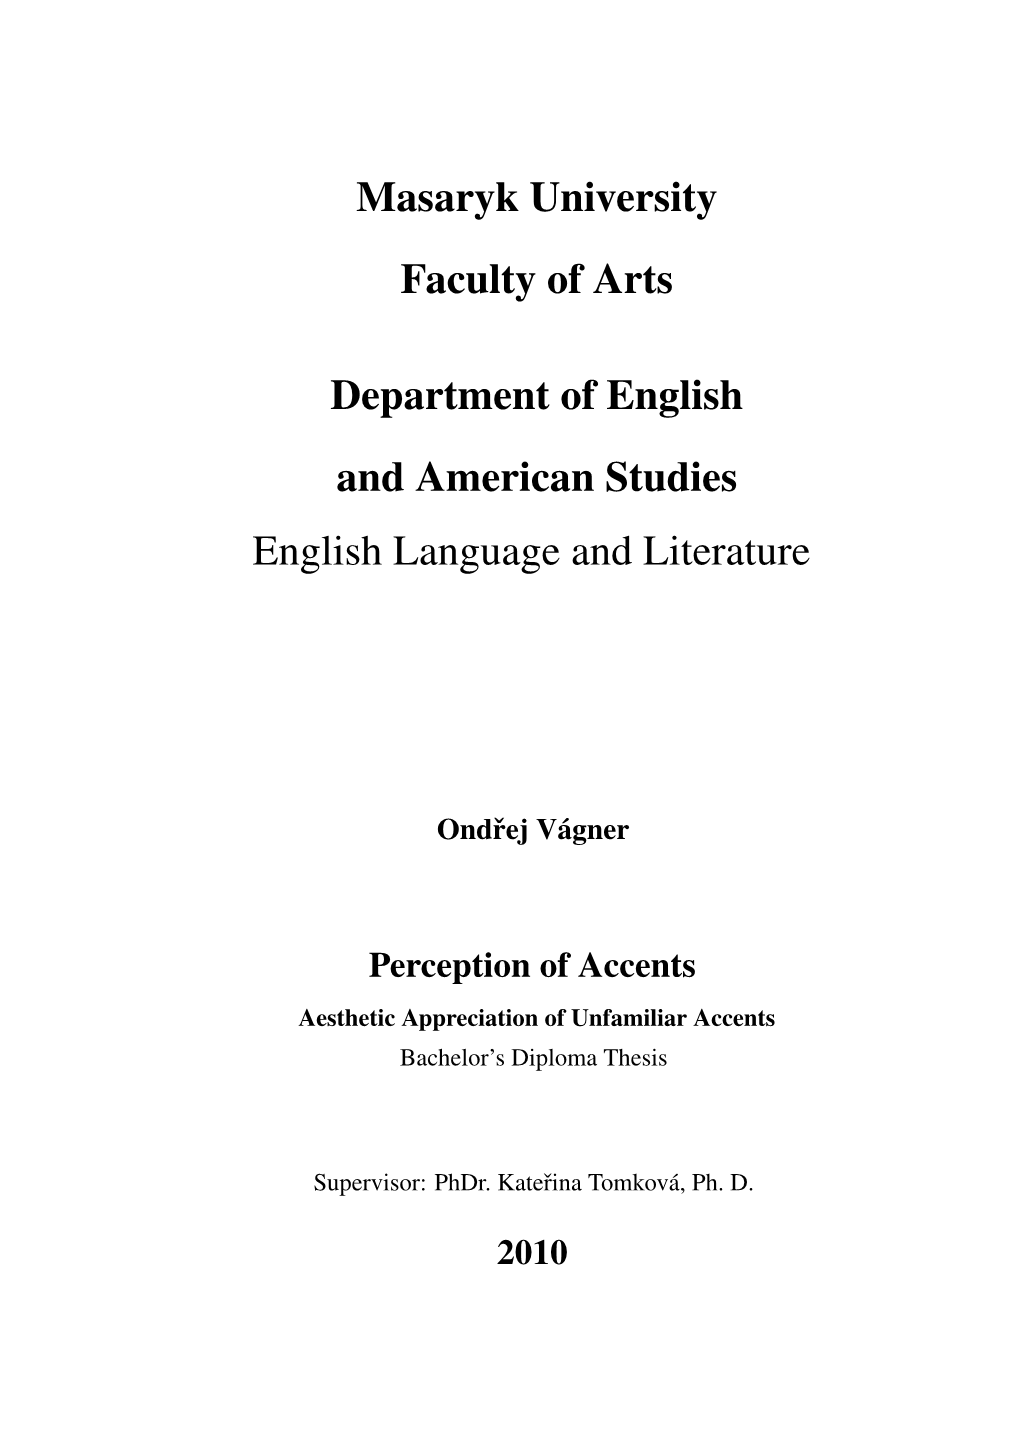 Aesthetic Appreciation of Unfamiliar Accents Bachelor’S Diploma Thesis